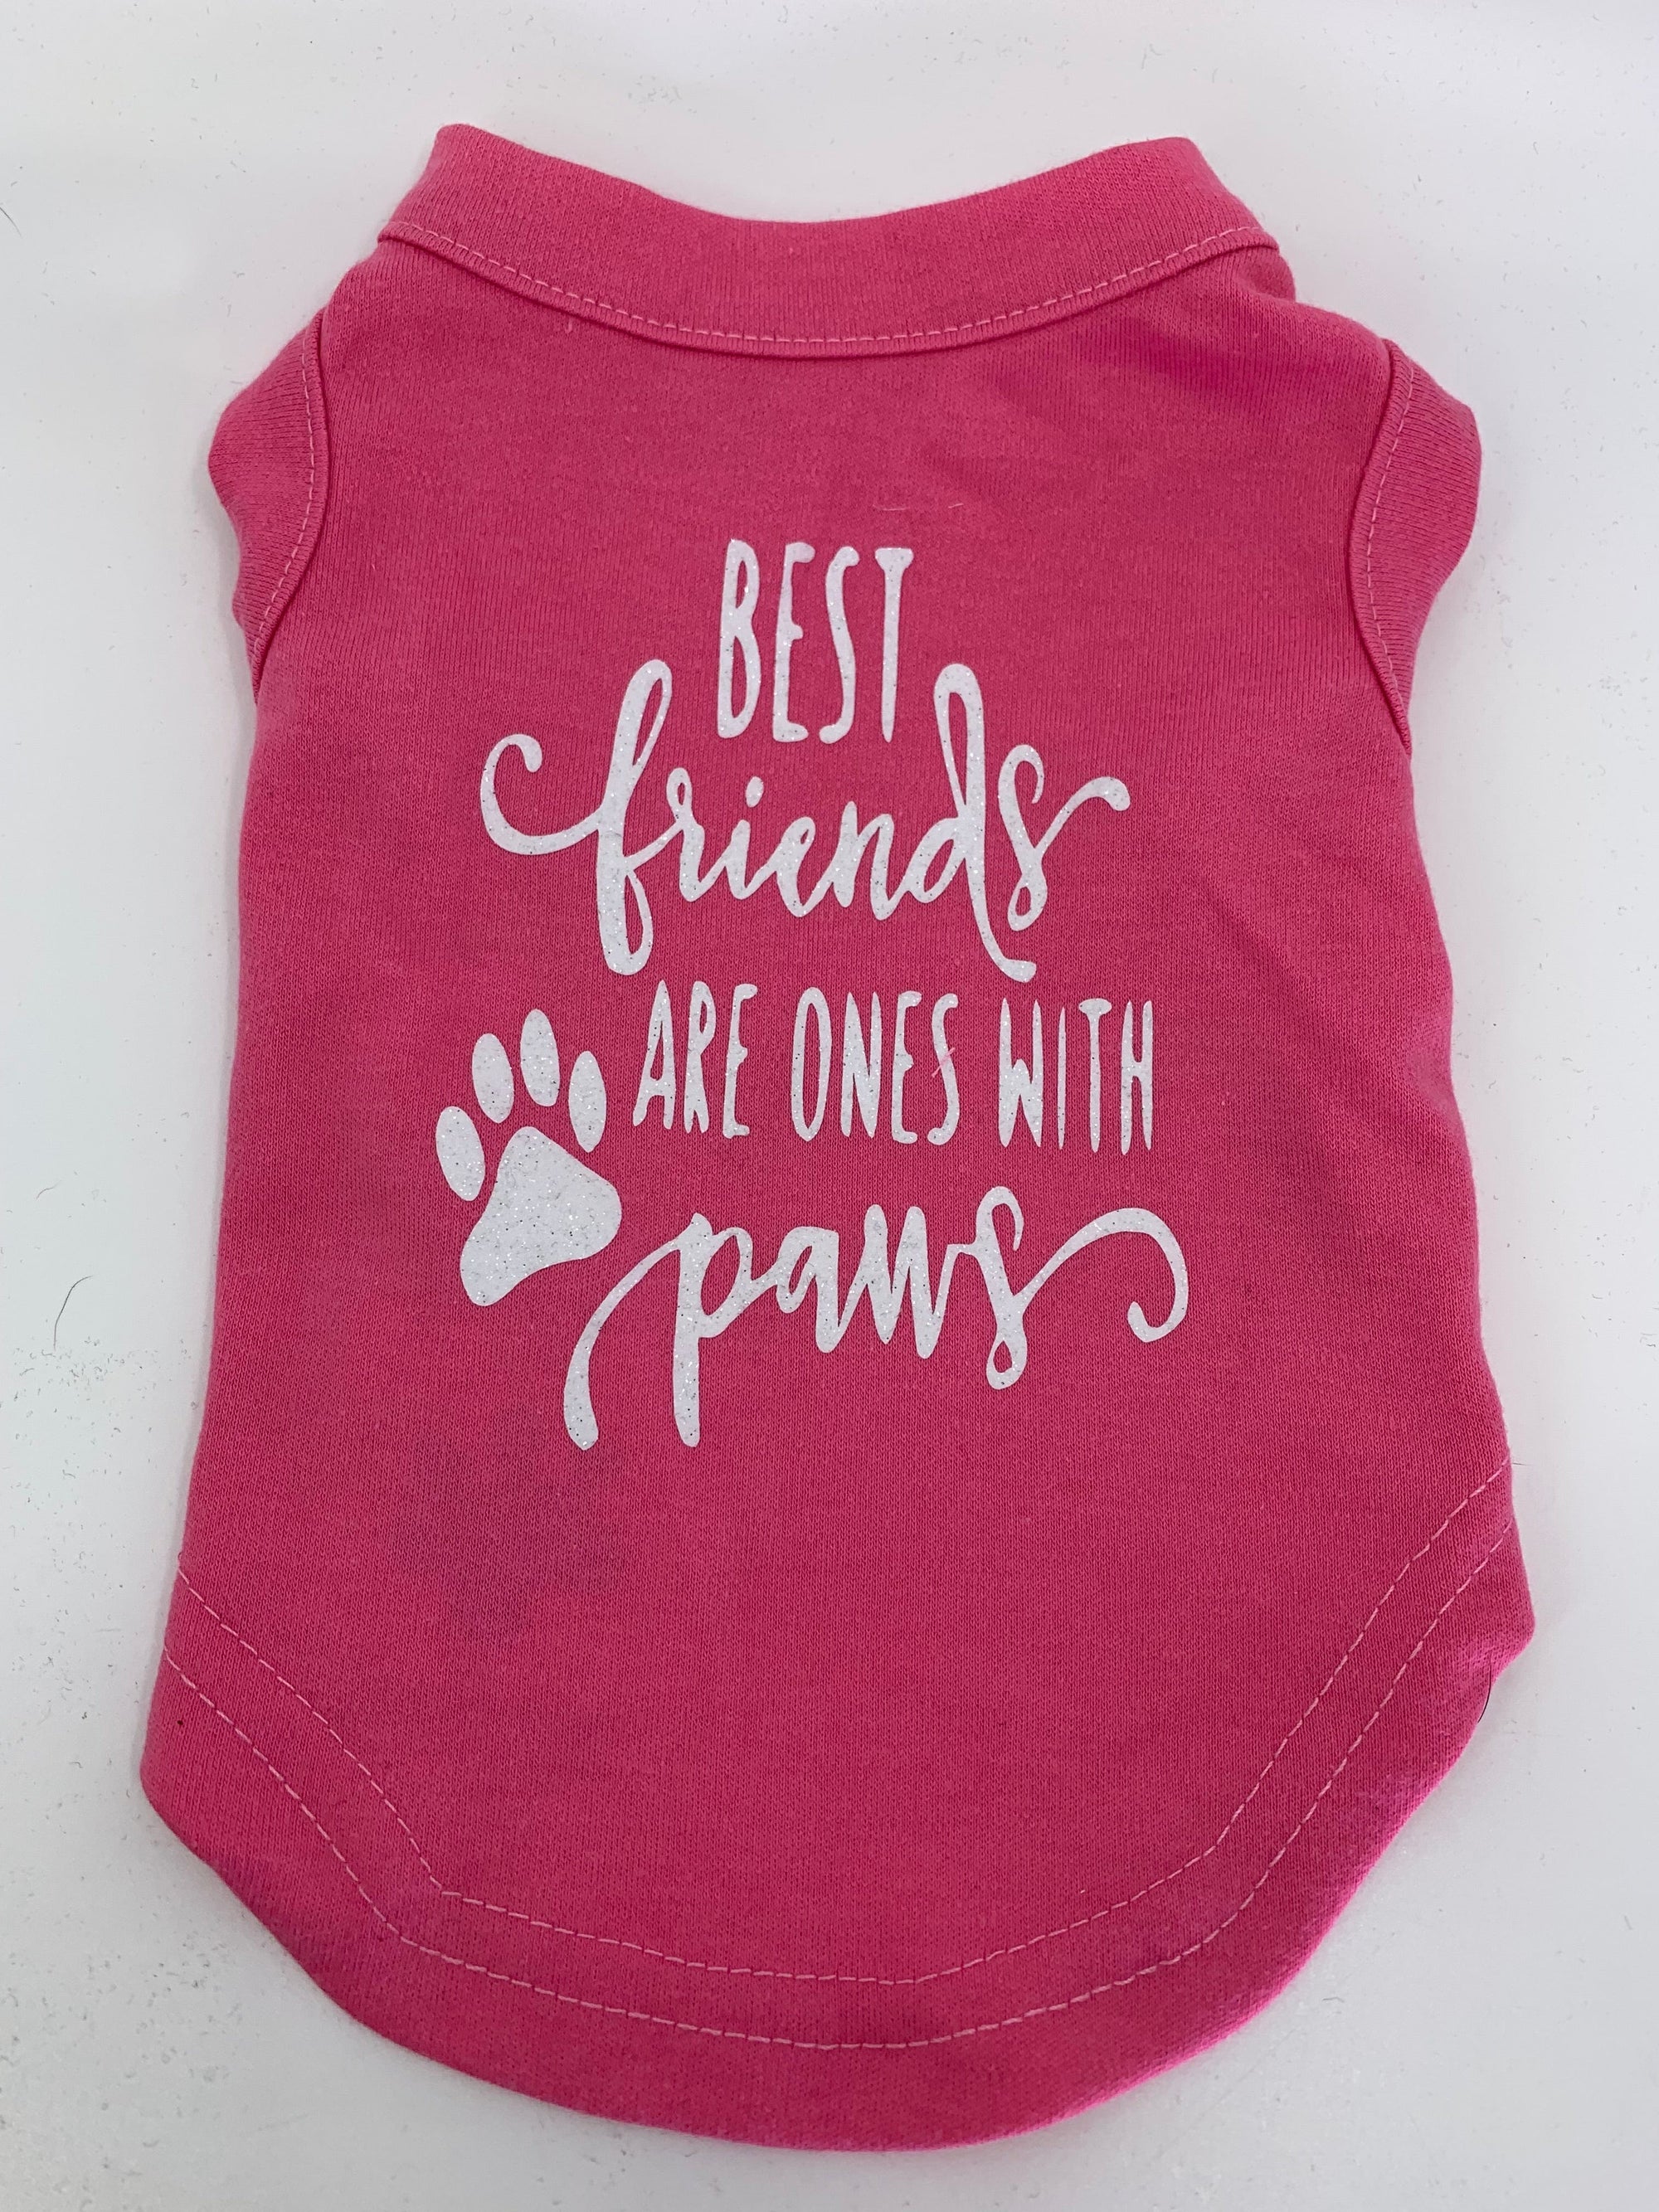 Equestrian Team Apparel XS / Dark pink Just Fur Fun- Best friends are ones with paws Dog T-shirt equestrian team apparel online tack store mobile tack store custom farm apparel custom show stable clothing equestrian lifestyle horse show clothing riding clothes horses equestrian tack store